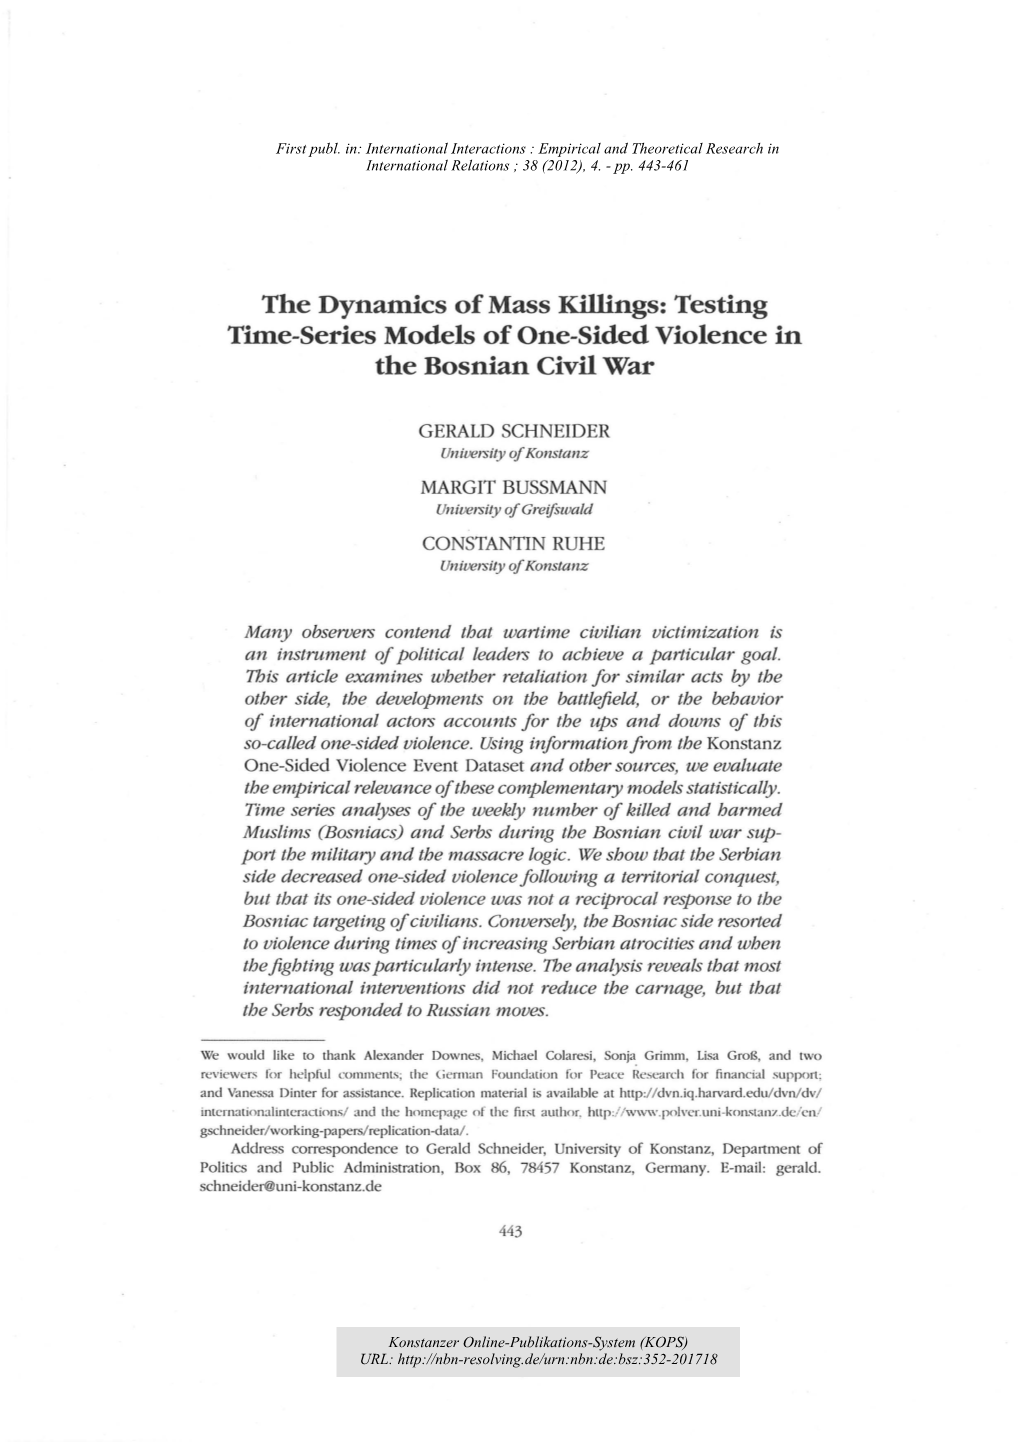 The Dynamics of Mass Killings : Testing Time-Series Models of One